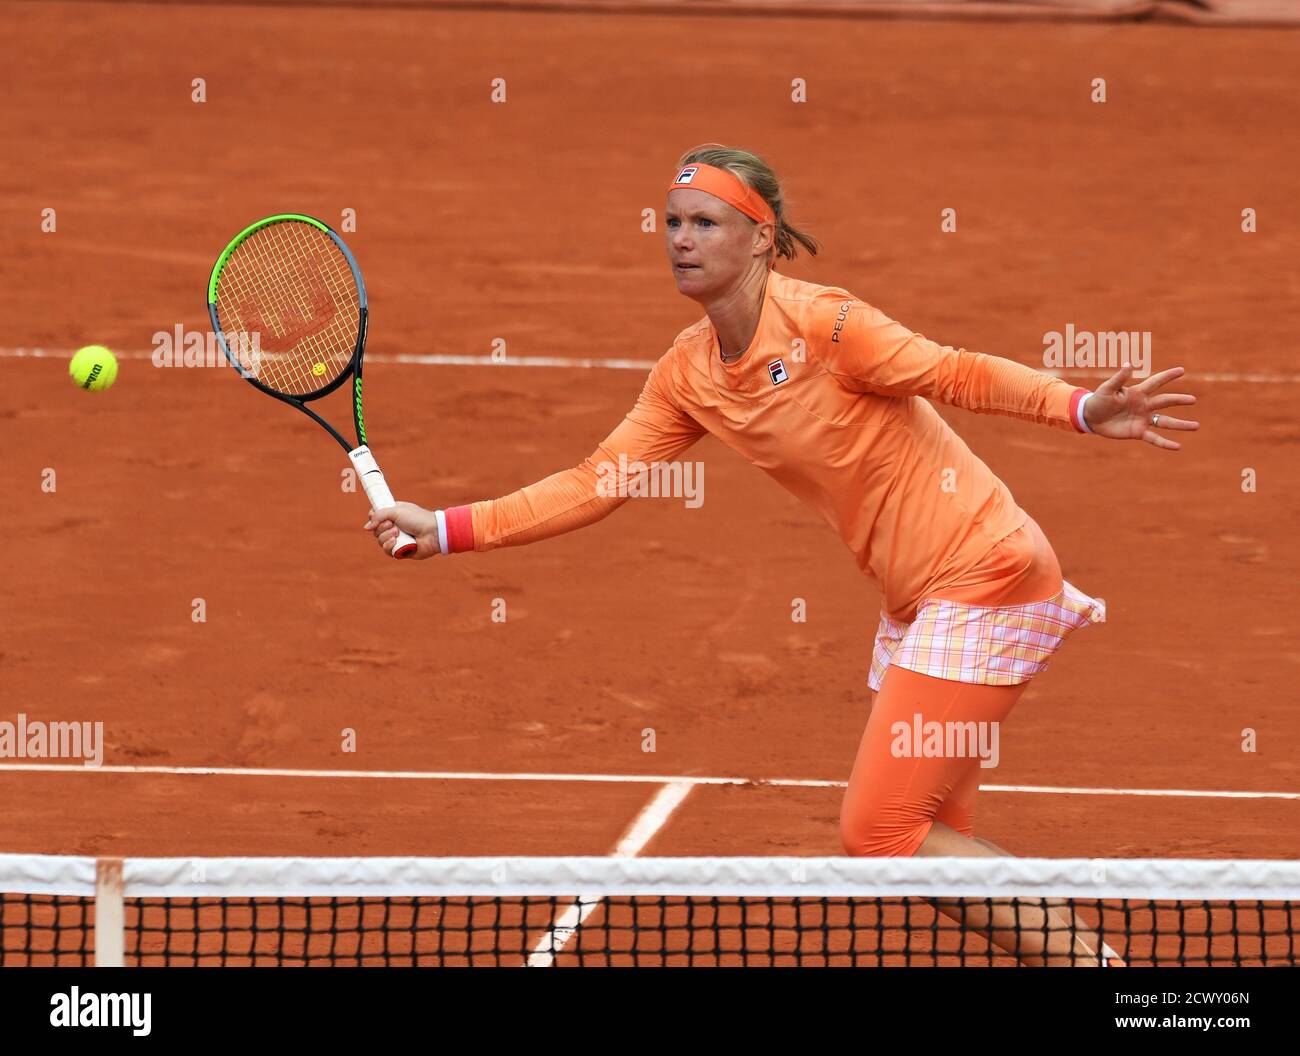 Paris, France. 30th Sep, 2020. Roland Garros Paris French Open 2020 Day 4  300920 Kiki Bertens (NED) in action during loss - she had to be helped off  court with severe cramp